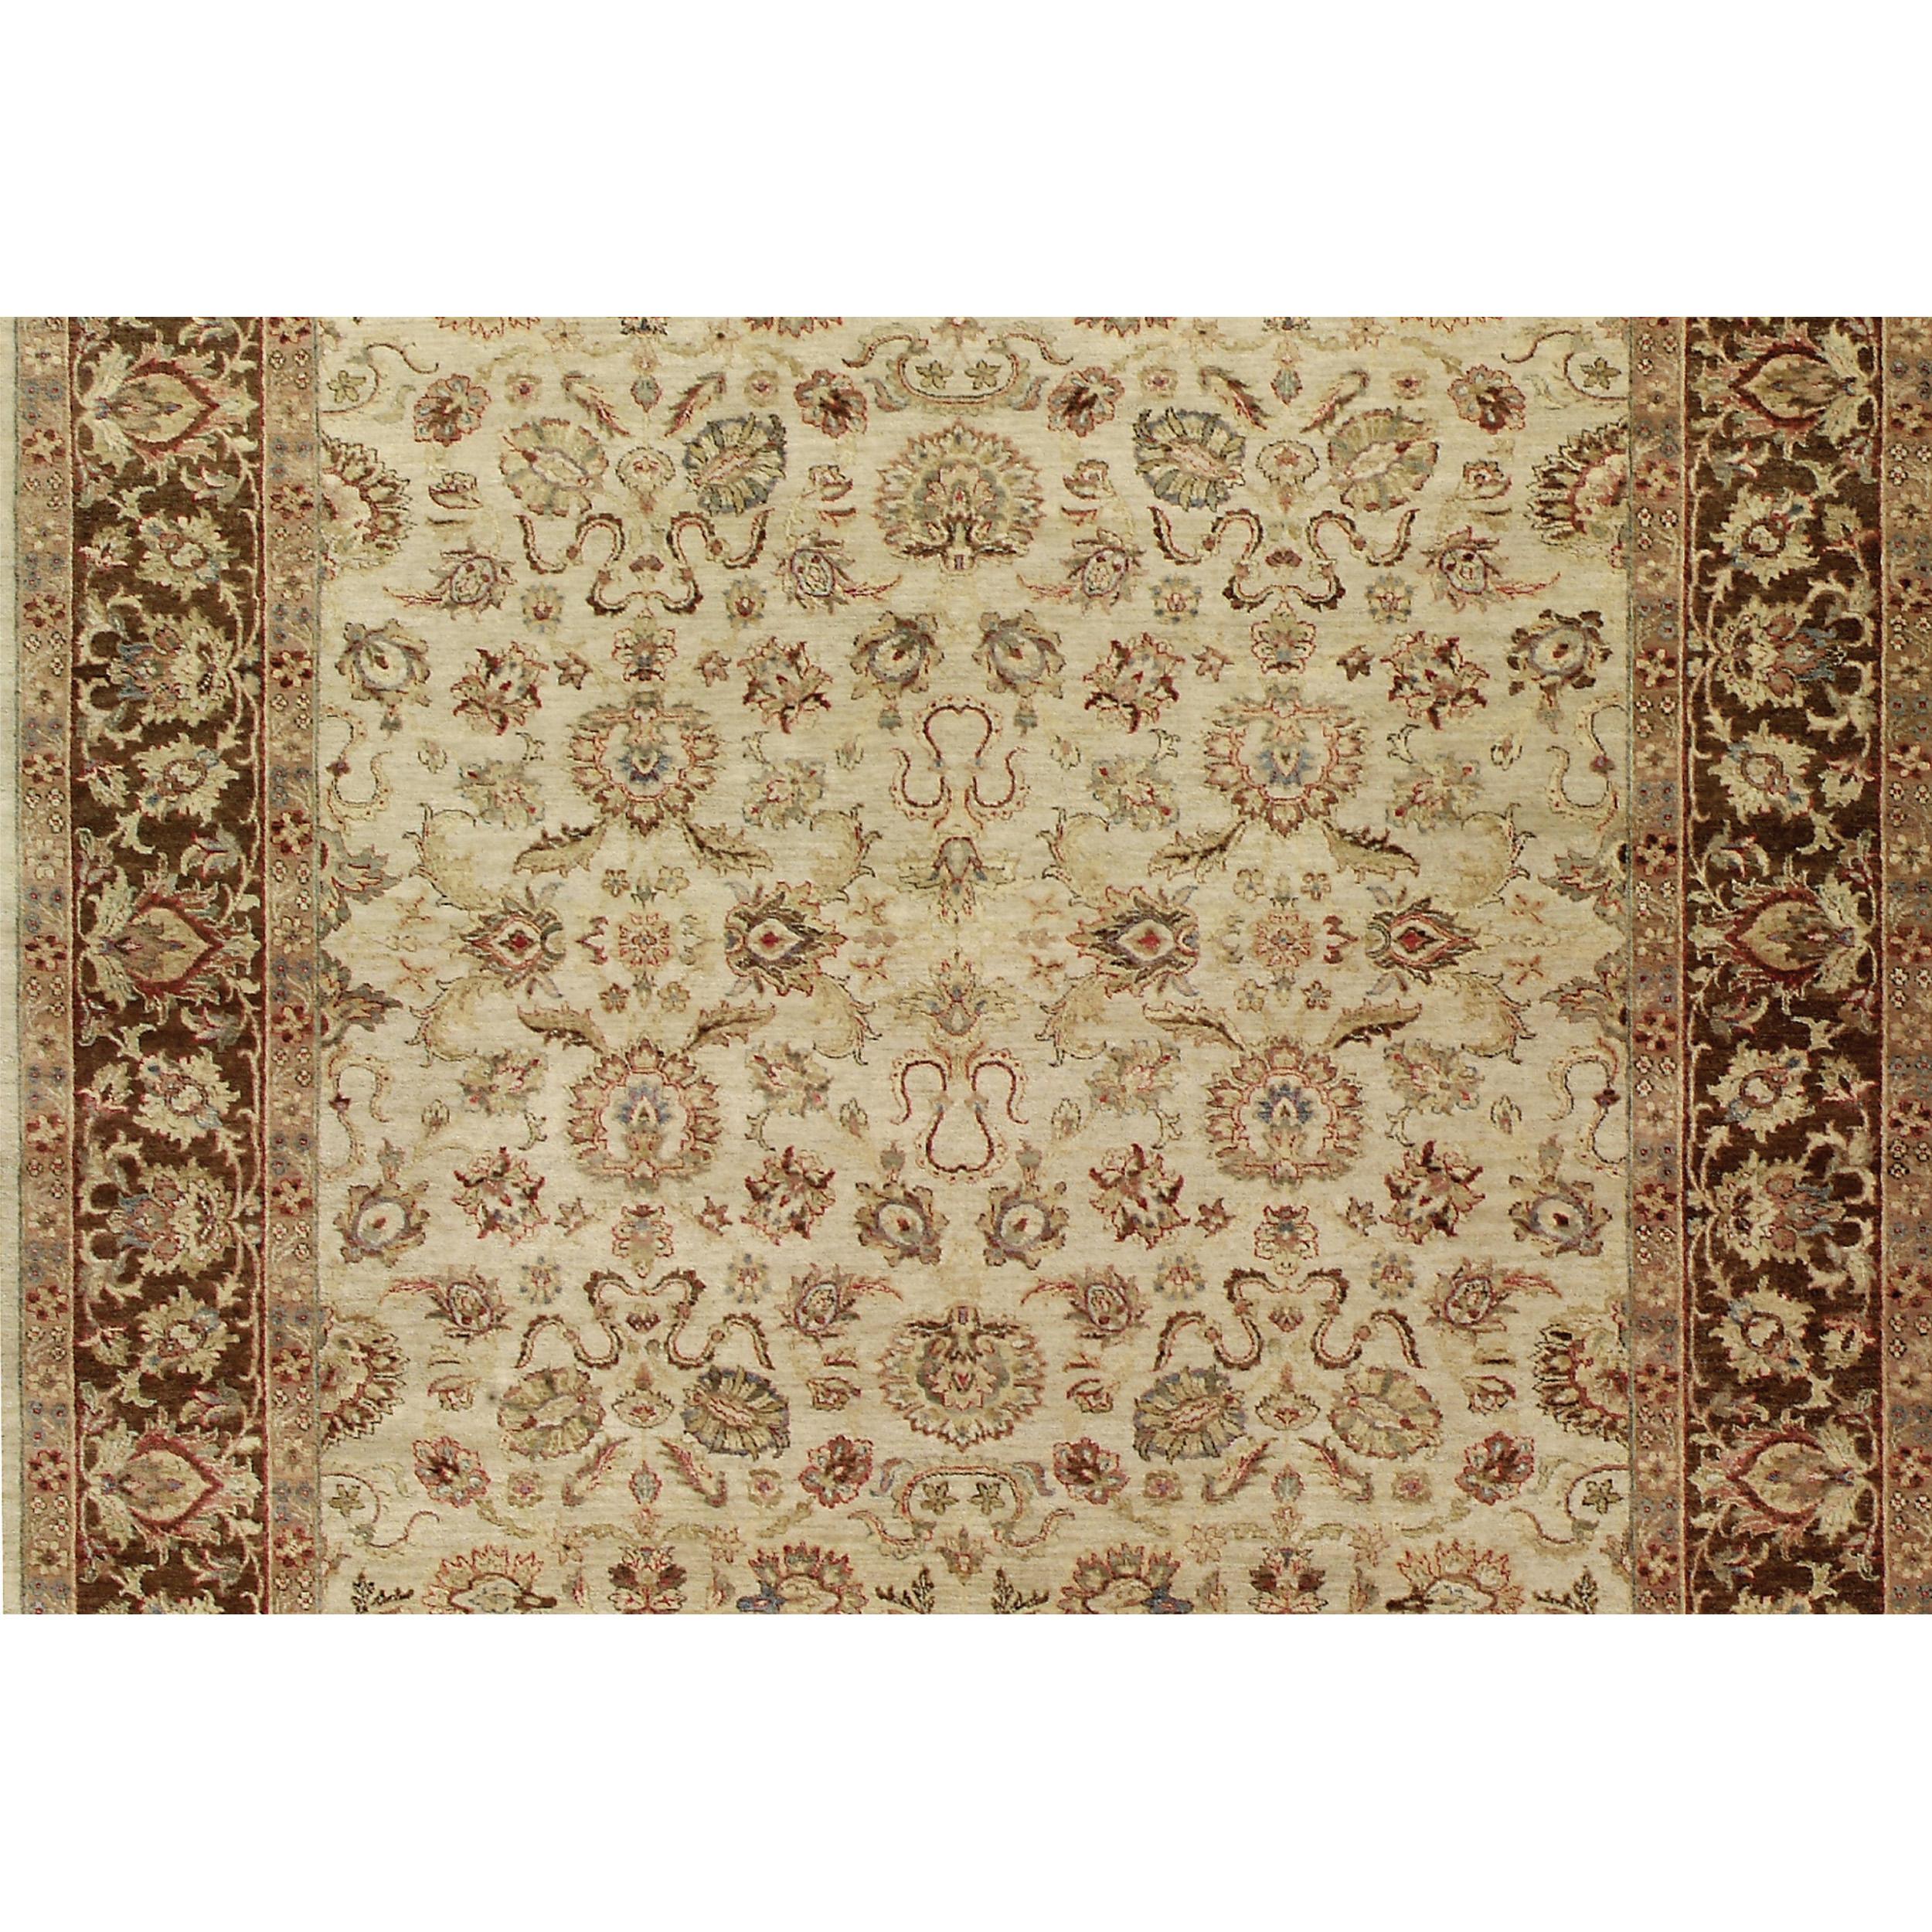 Indian Luxury Traditional Hand-Knotted Cream/Mocha 14x28 Rug For Sale